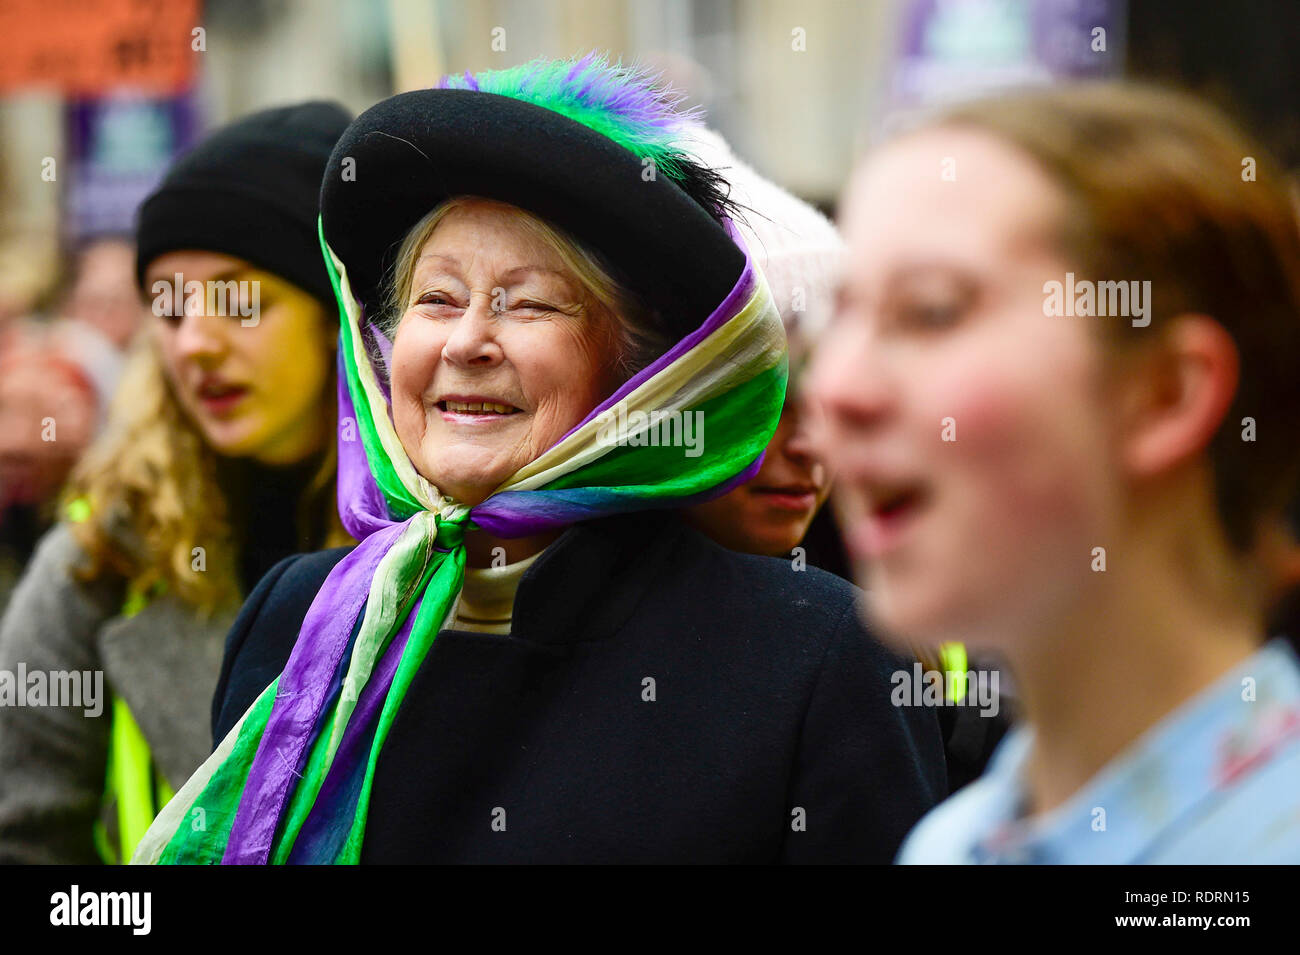 London, UK. 19th Jan, 2019. A woman dressed as a suffragette during the Women's March in the capital, one of 30 such worldwide marches protesting against violence against women and the negative impact of austerity policies. London's theme this year is 'Bread and Roses', honouring Polish-American suffragette Rose Schneiderman who, in 1911 said 'The worker must have bread but she must have roses too', in response to a factory fire where 146 mainly female garment workers died. Credit: Stephen Chung/Alamy Live News Stock Photo